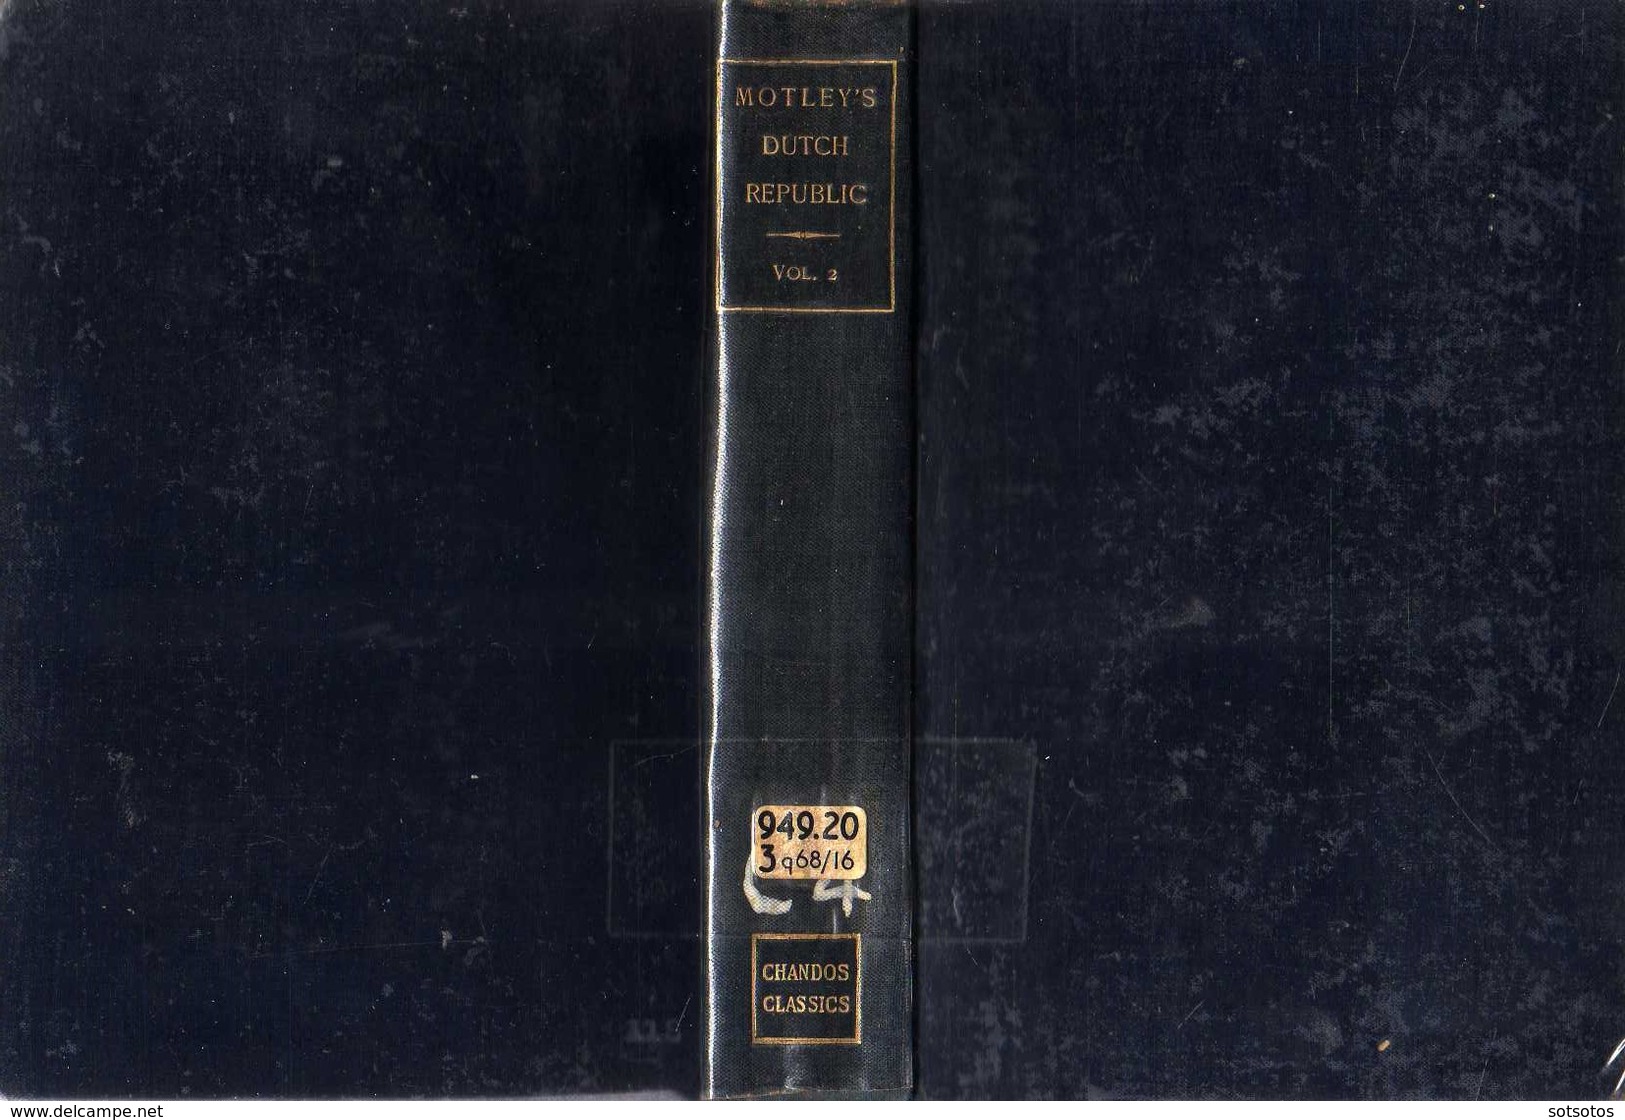 The RISE Of The DUTCH REPUBLIC Vol. II: J. LOTHROP MOTLEY And A.J. MANSFIELD, Ed. Fr. WARNE (1902?), 572 Pages, Good Con - Oudheid